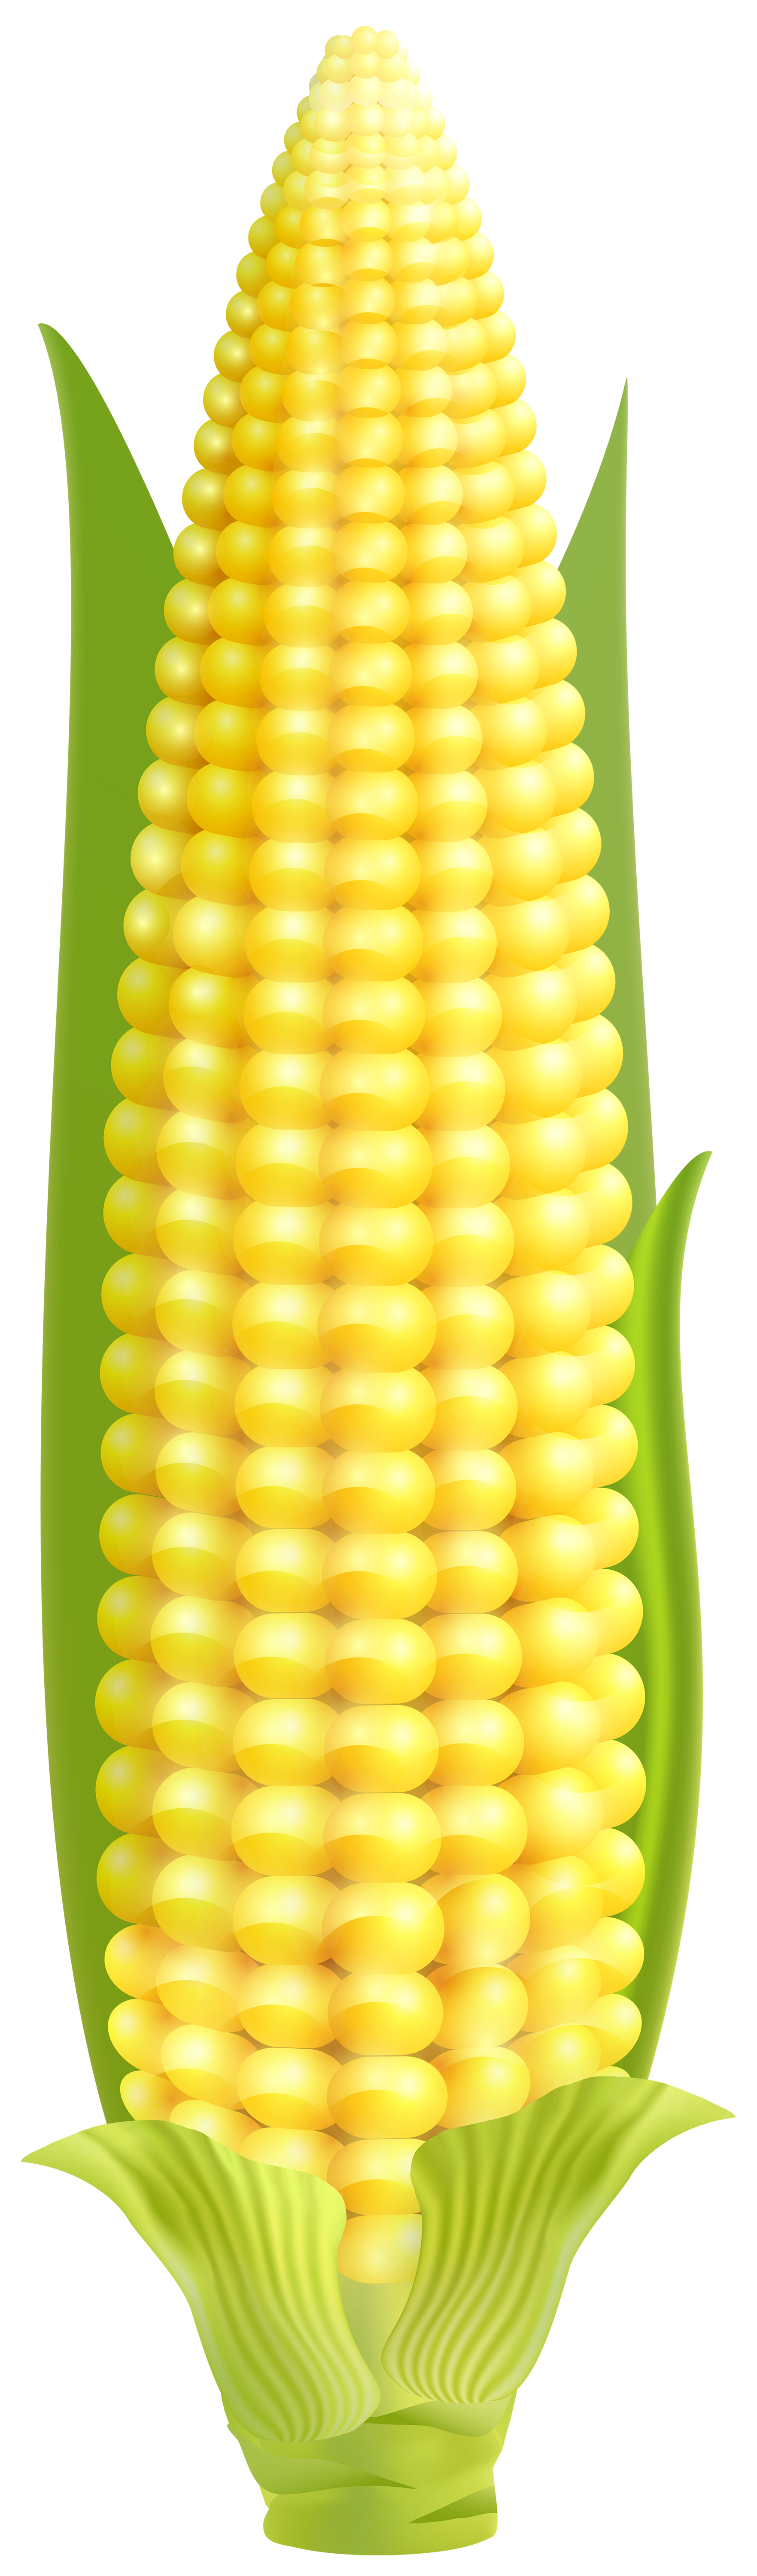 Corn Png Clipart Gallery Yopriceville High Quality Images And Transparent Png Free Clipart